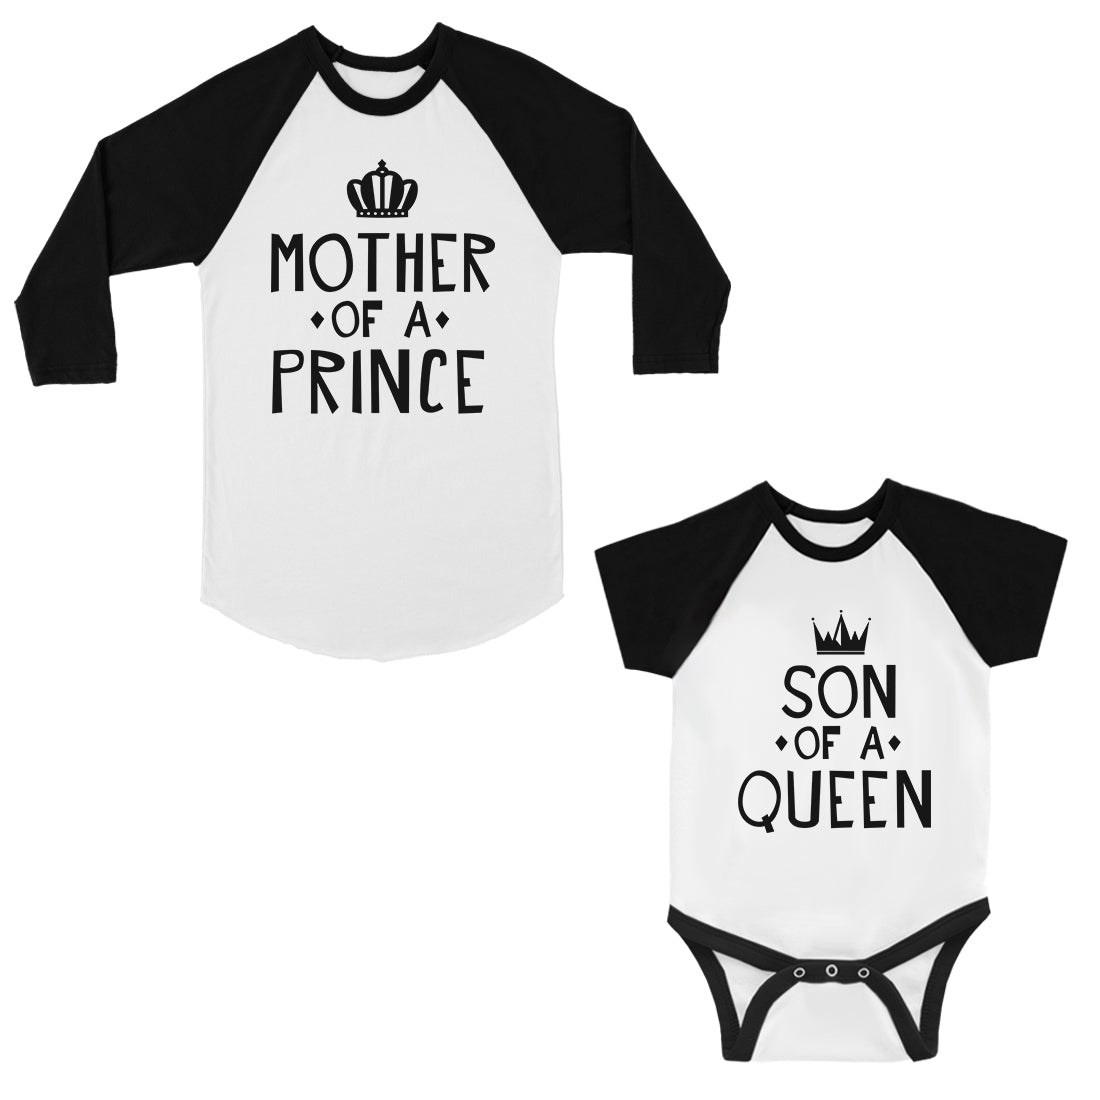 Queen Of Prince Mom Baby Matching Baseball Shirts Baby Shower Gift Black and White